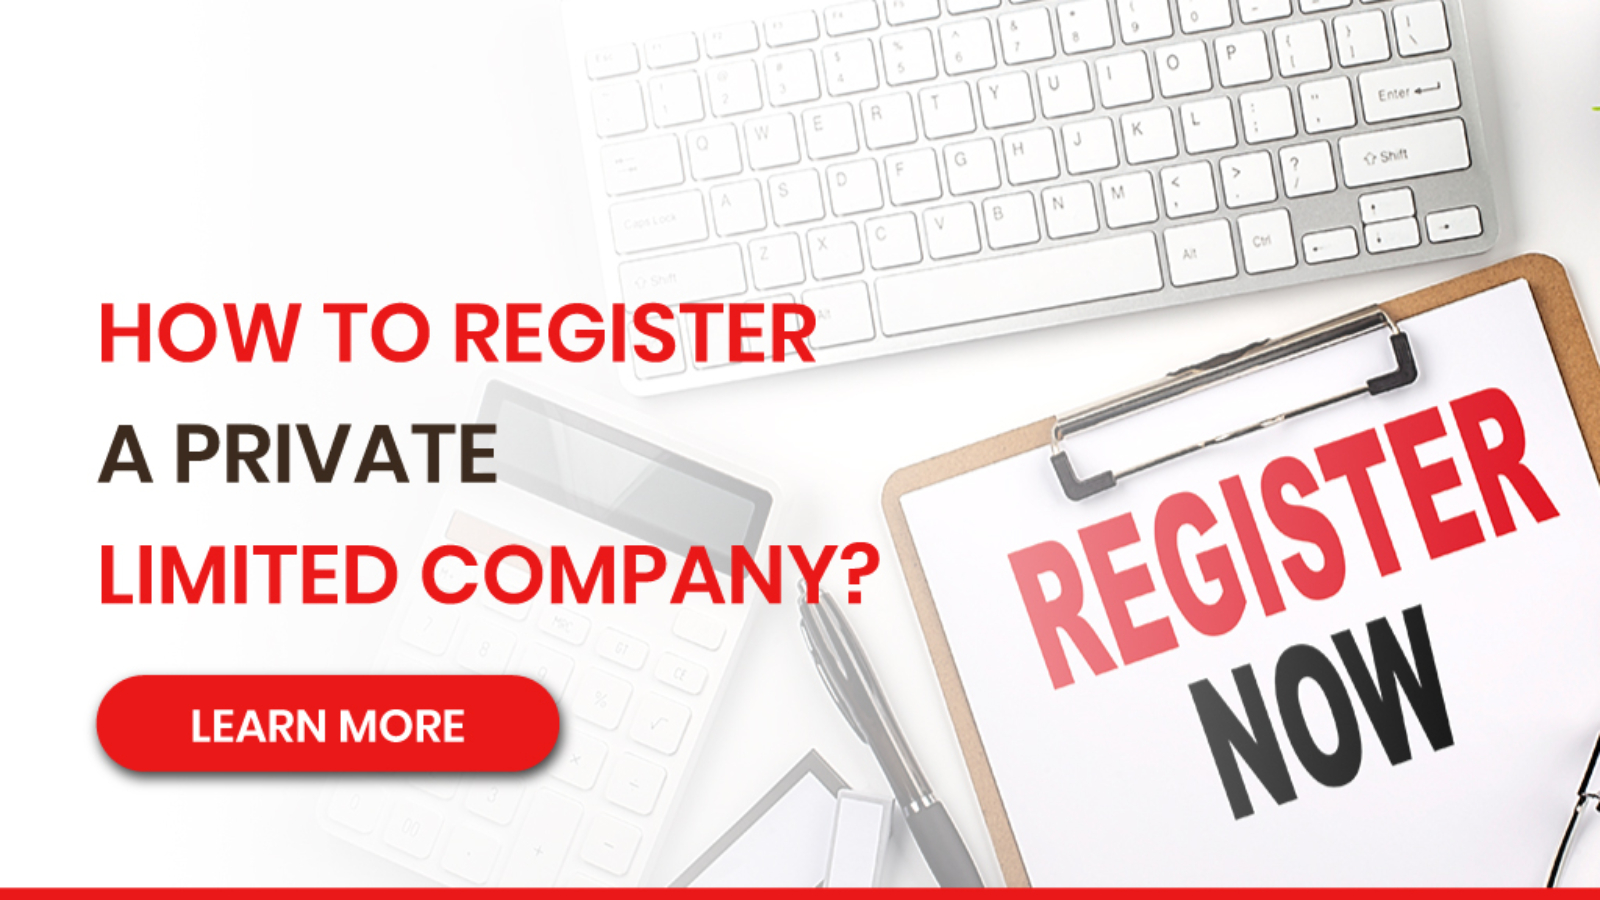 How to Register a Private Limited Company?